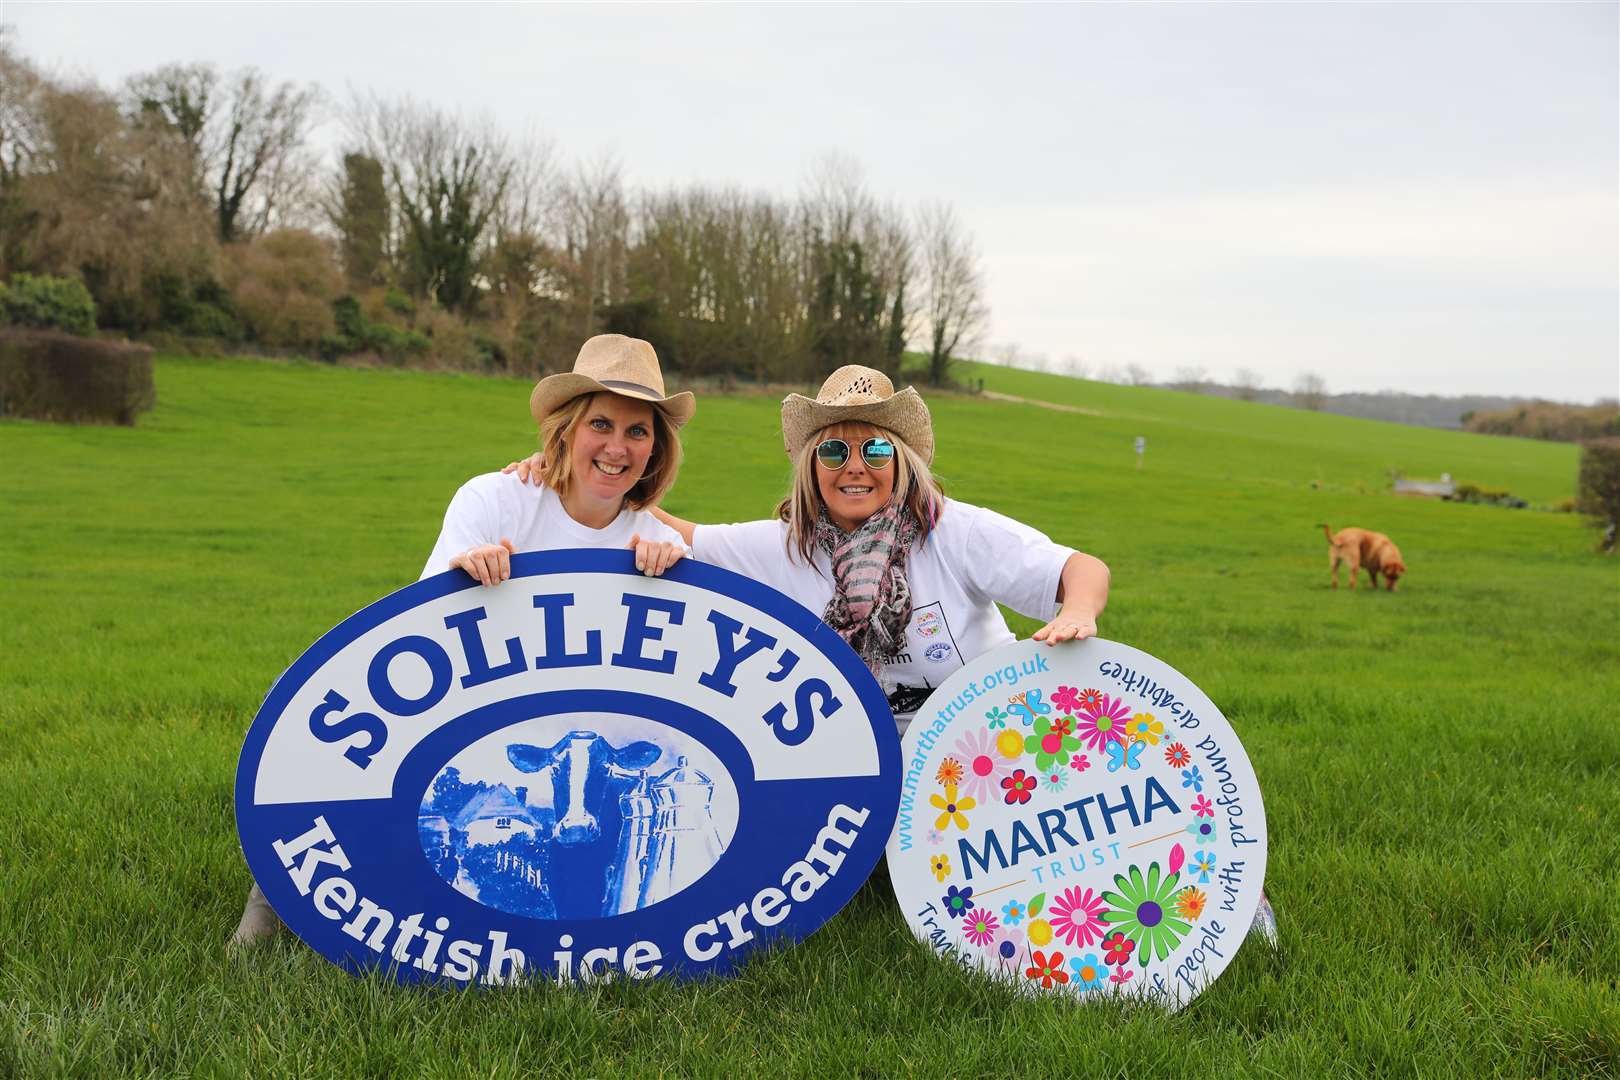 Katie Morrison and Kerry Banks have teamed up to hold the new family Christmas event in the fields of Solleys Ice Cream. Picture: Andy Jones